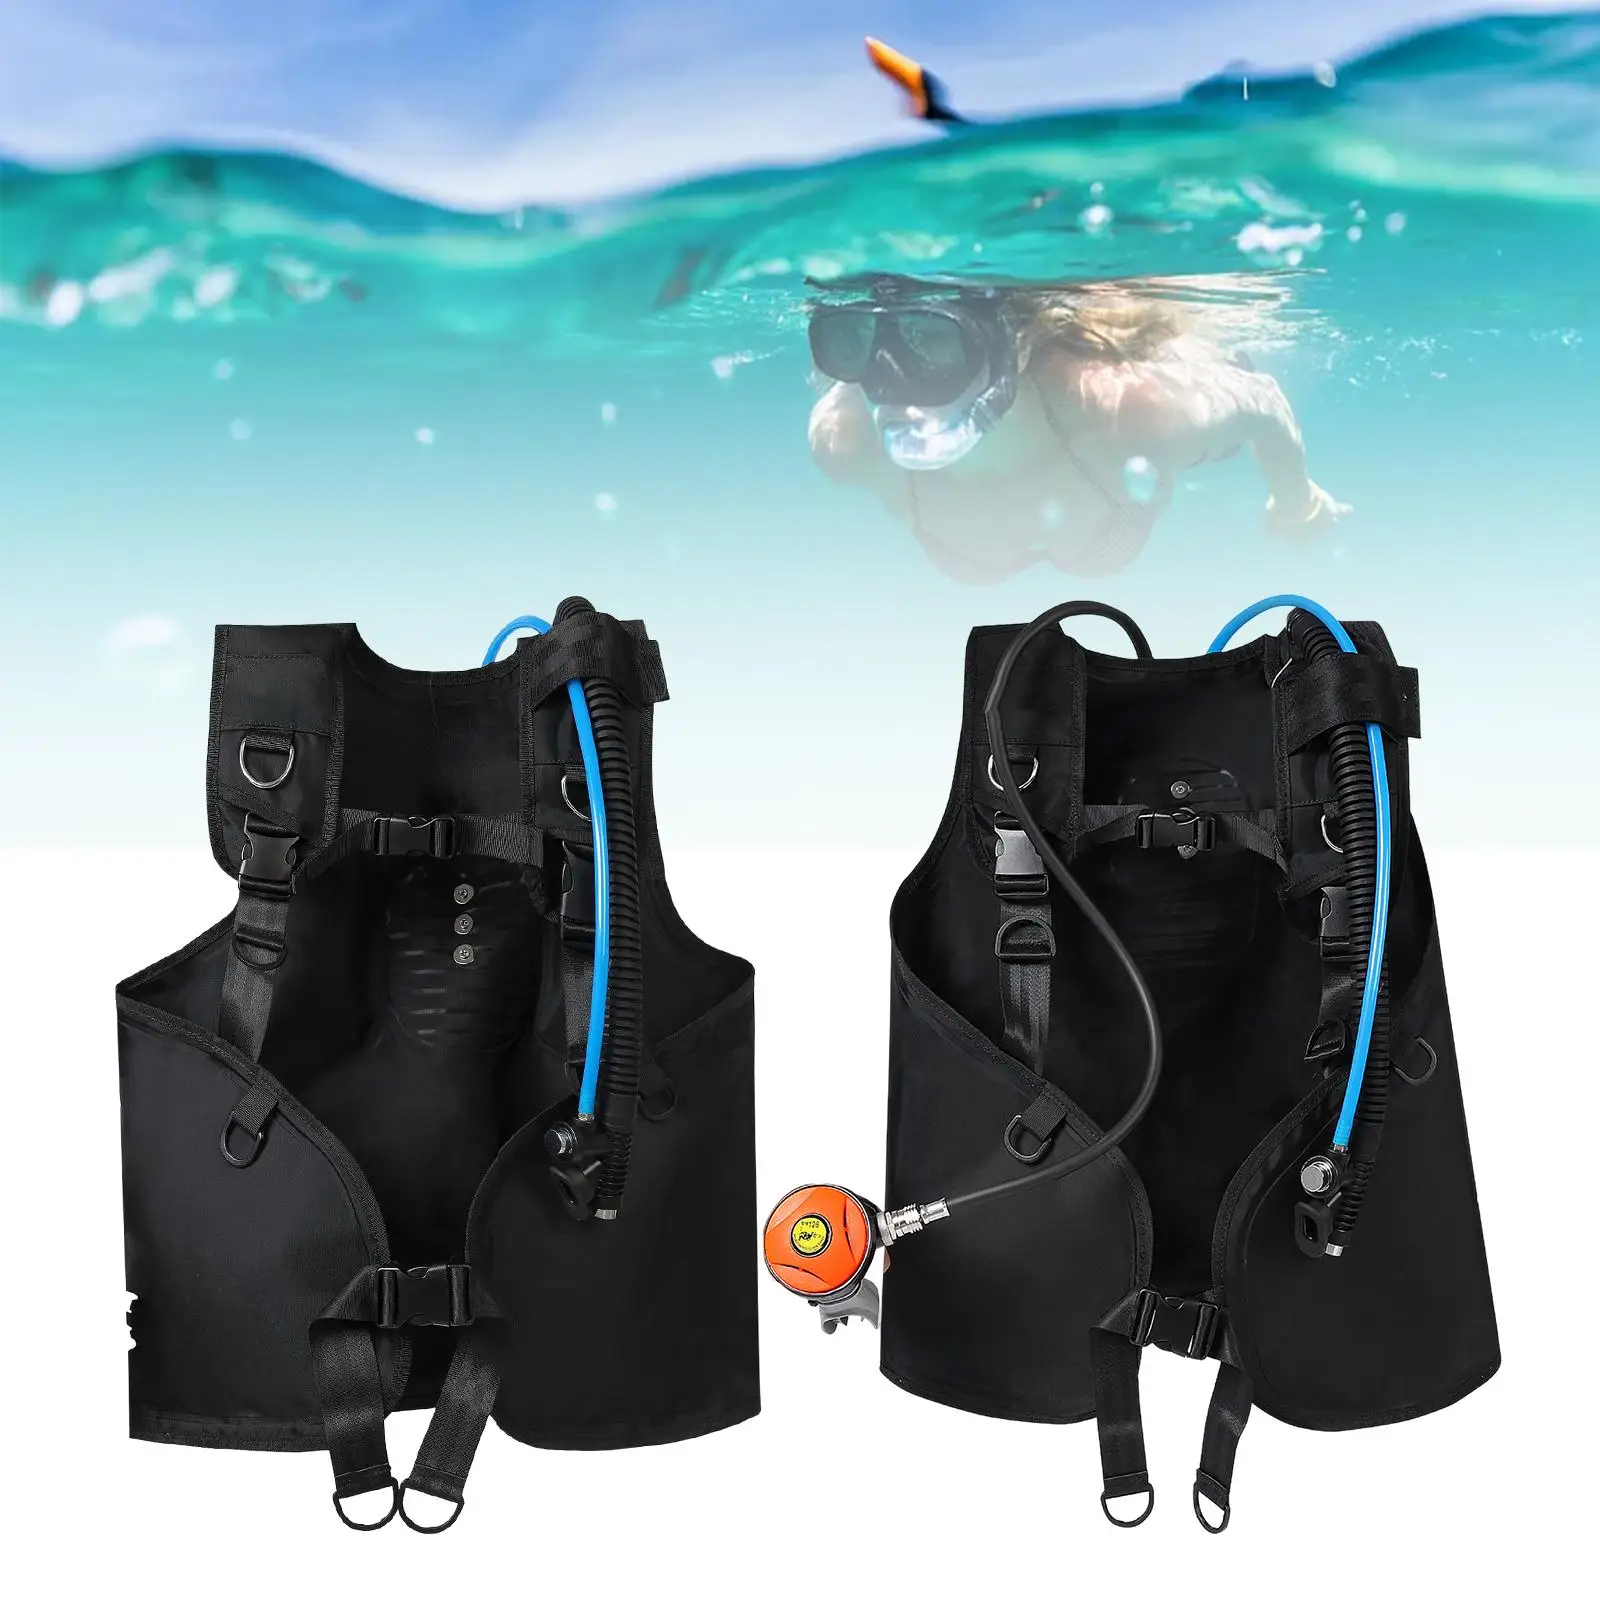 BCD Vest Snorkel Diving Surfing Top Scuba Vest Thickended Water Sports Surfing Snorkeling Scuba Diving Vest Scuba Diving Jacket